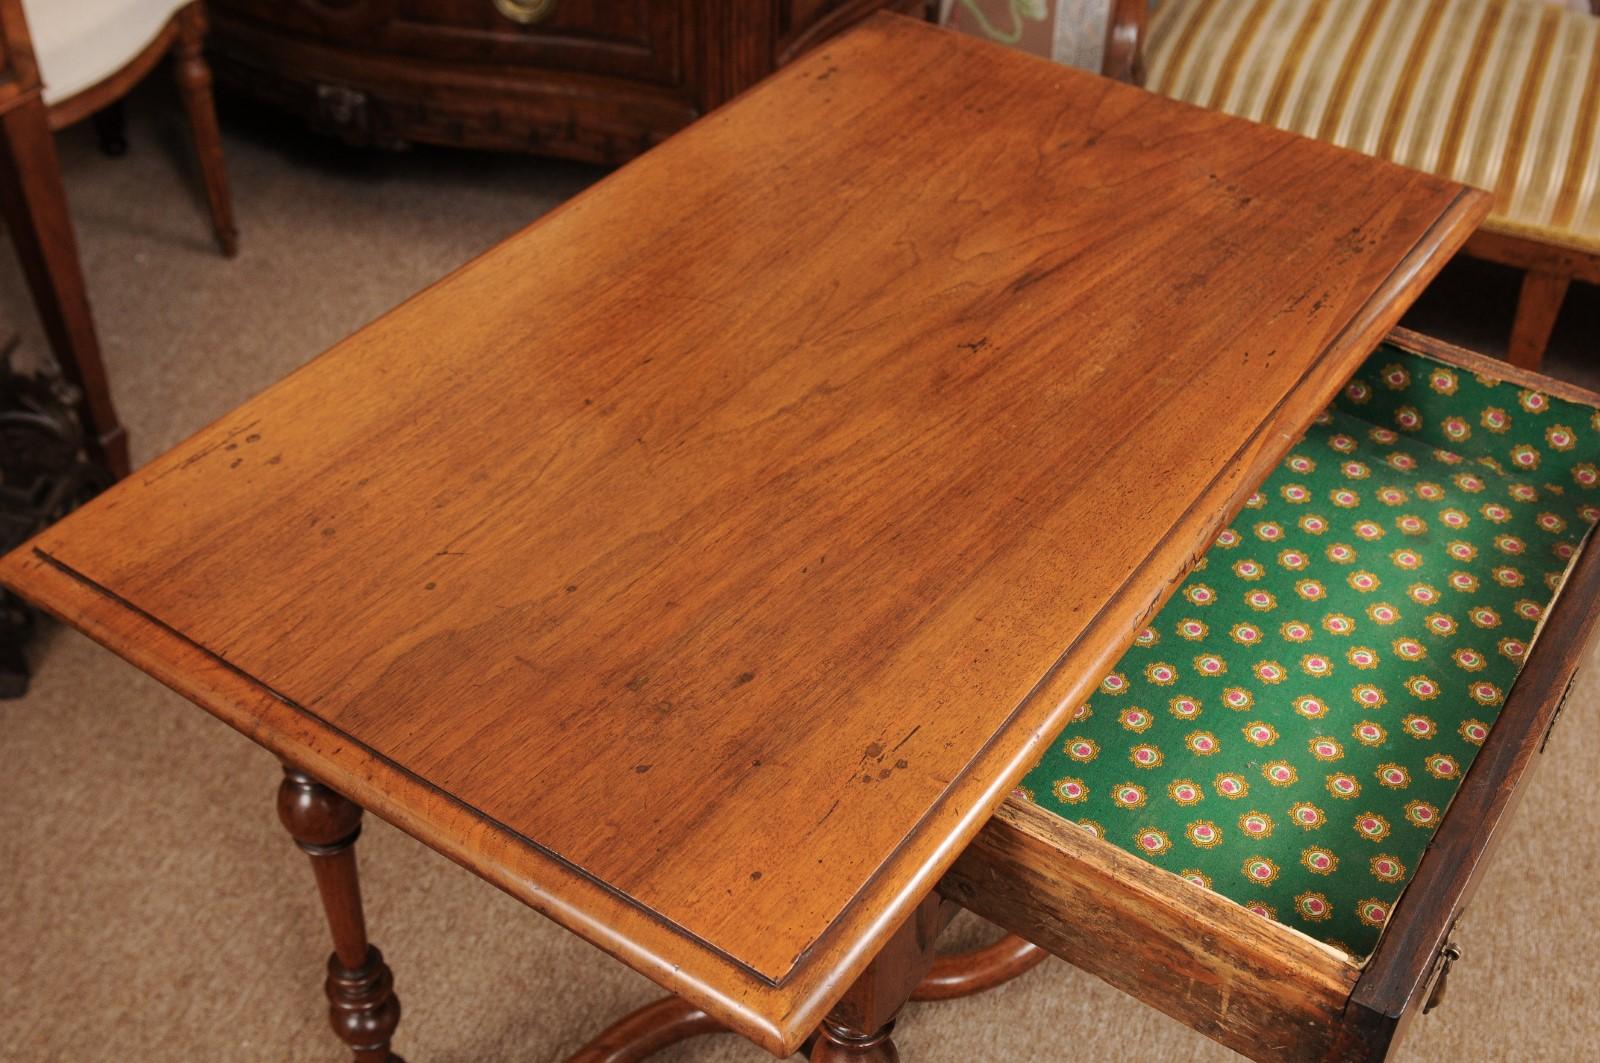 18th Century English Walnut Side Table with Drawer, Turned Legs & X-Stretcher 3